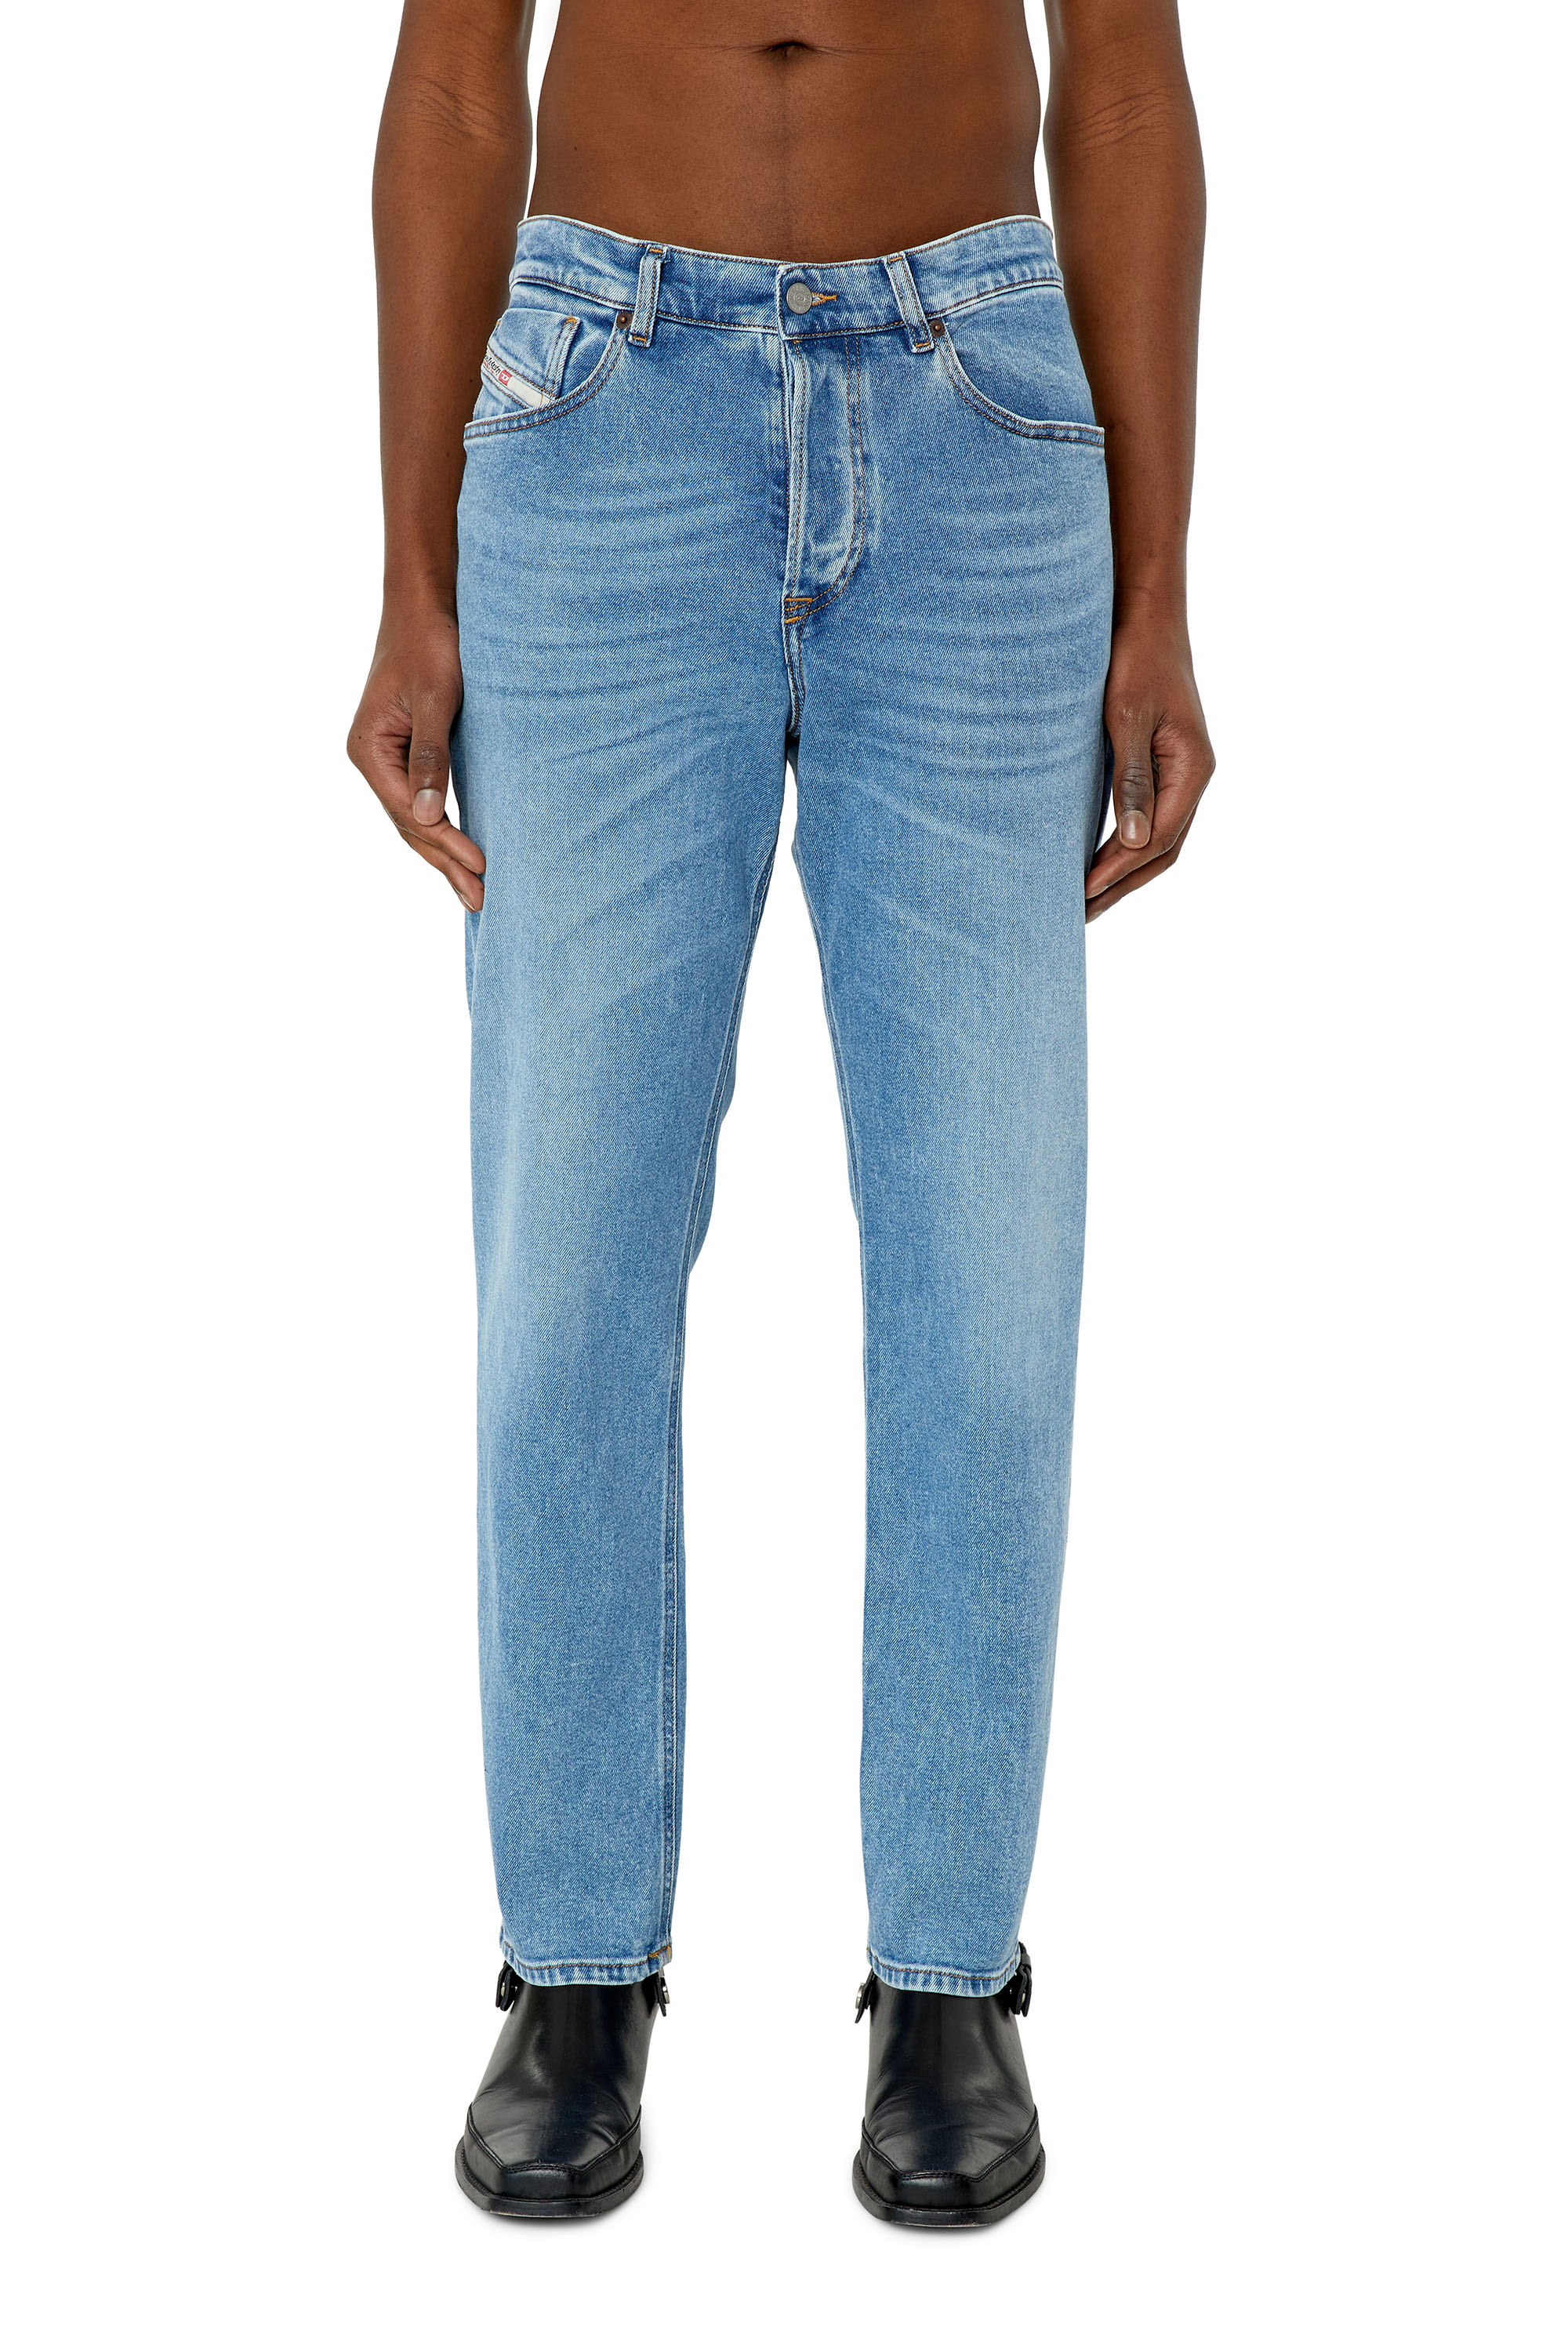 Tapered Jeans 2005 D-Fining 9B92L, Light Blue - Jeans